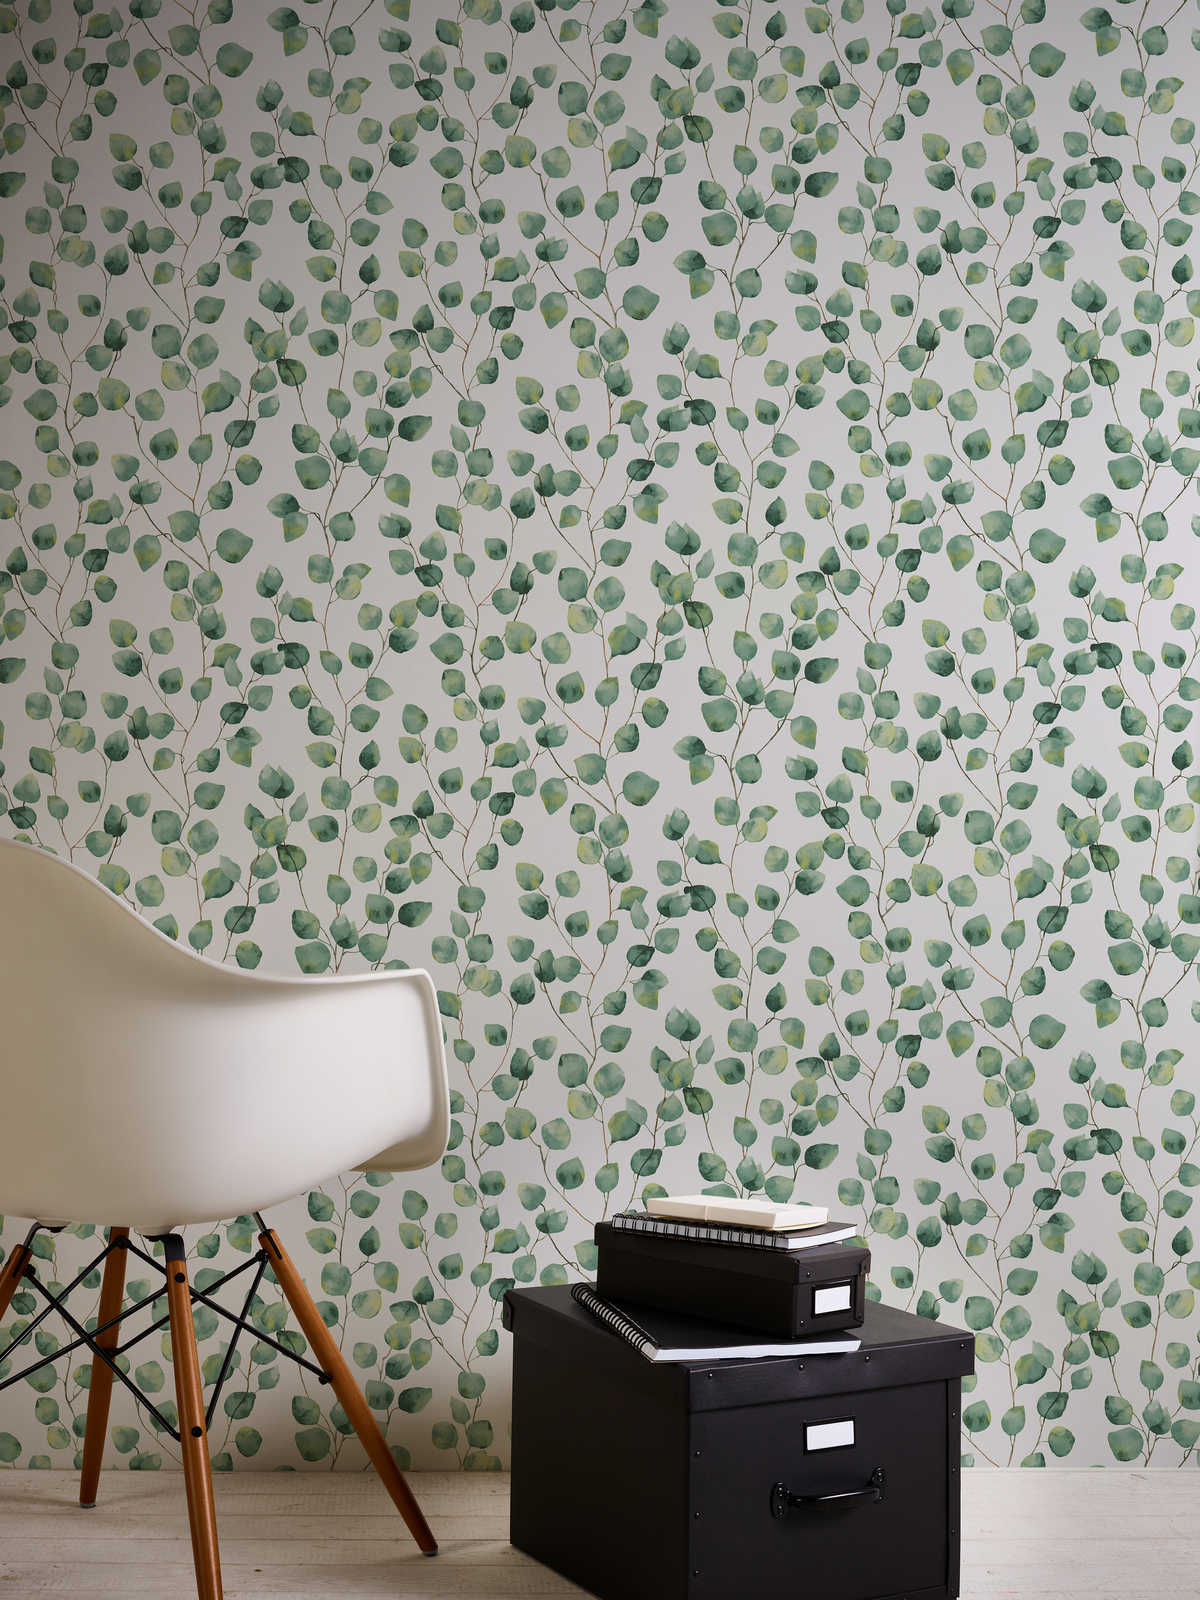             Self-adhesive wallpaper | leaf tendrils in watercolour style - white, green
        